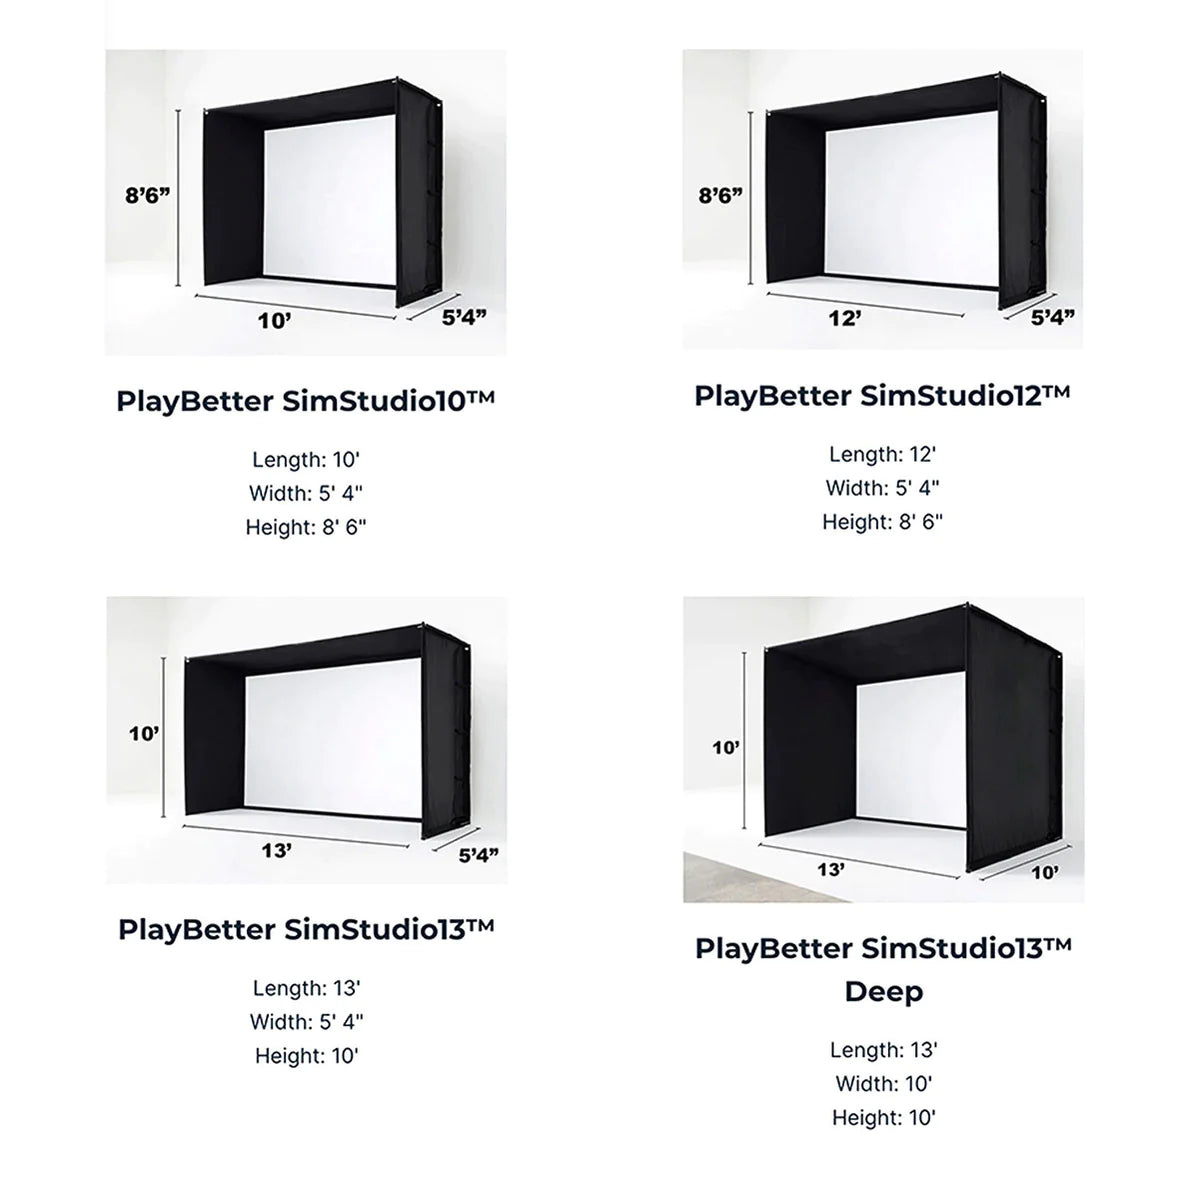 Images and size descriptions of the four PlayBetter SimStudio Size options